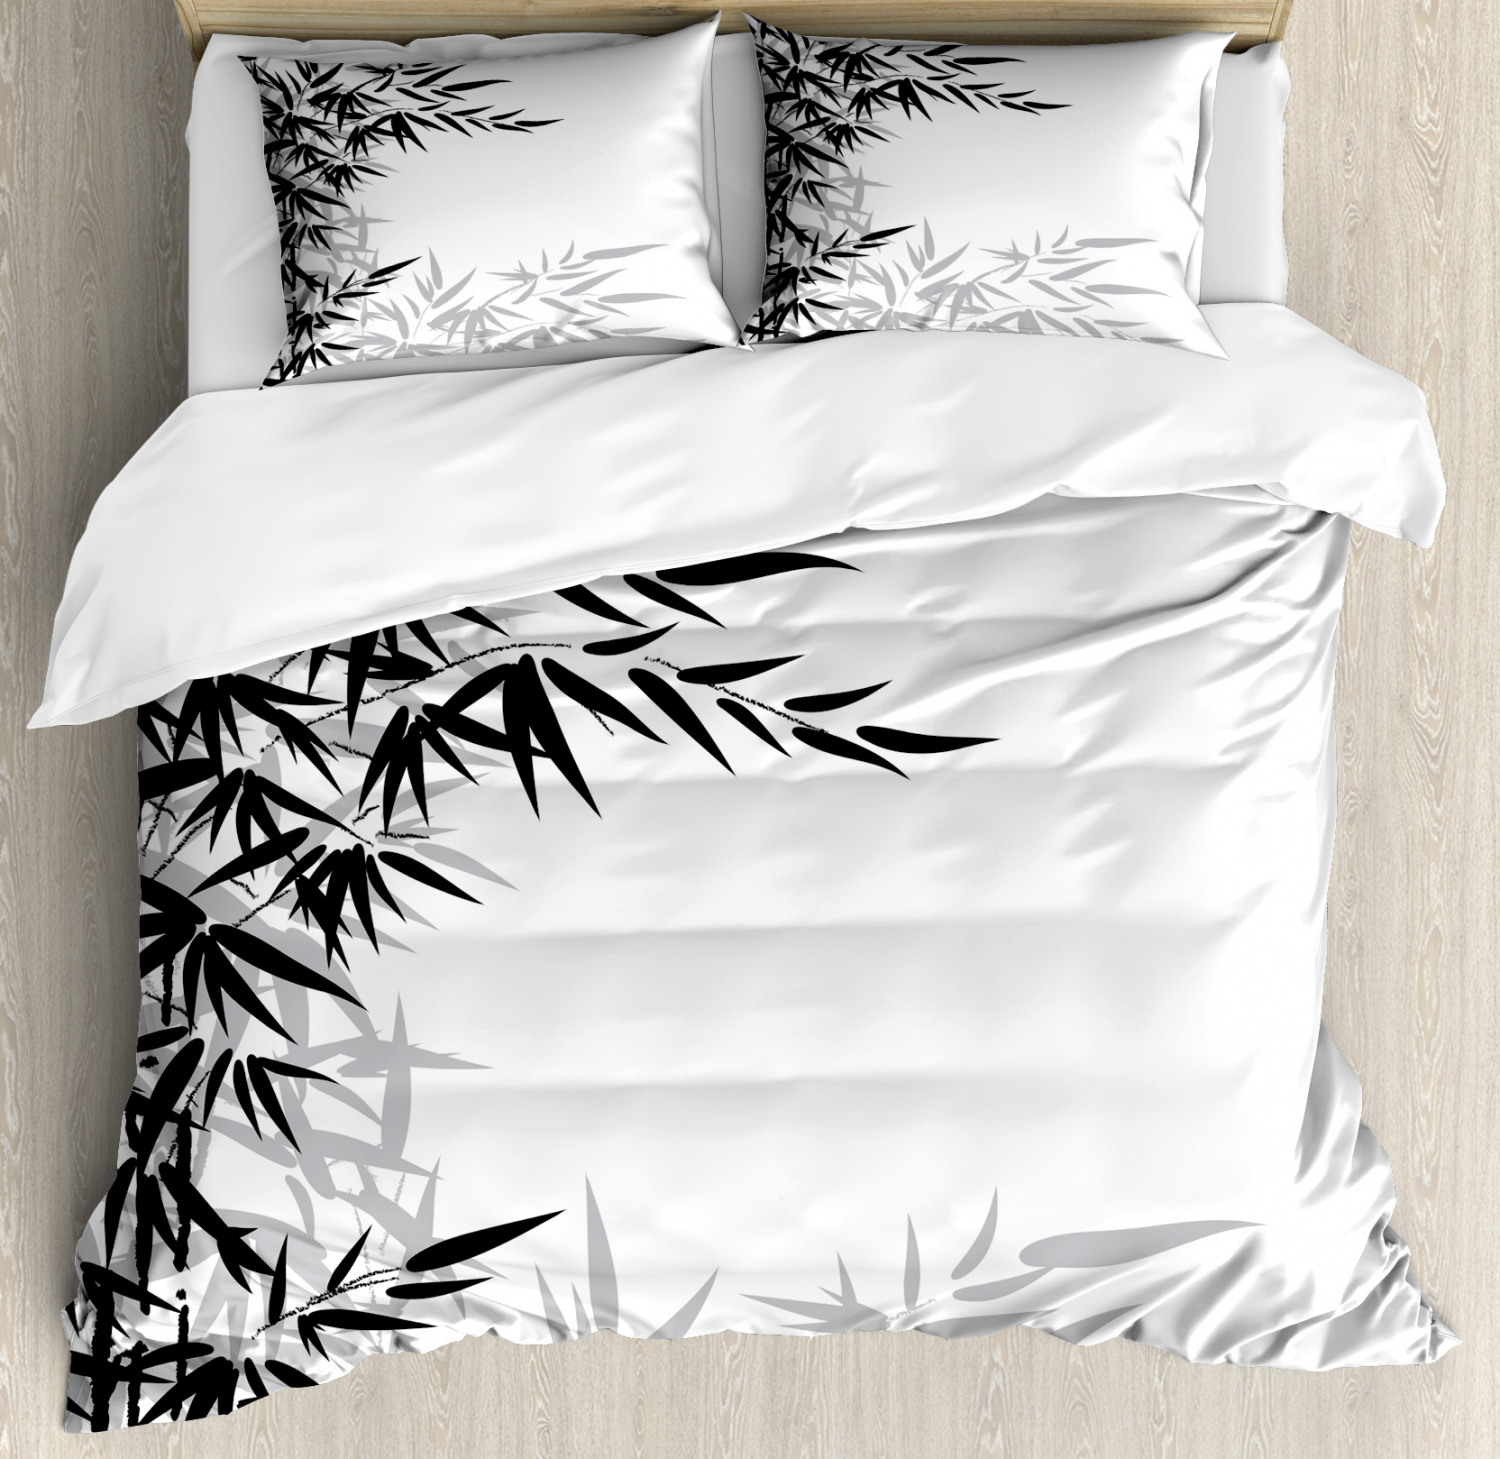 Forest Green Duvet Cover Set with Pillow Shams Camo Palm Leaves Print 